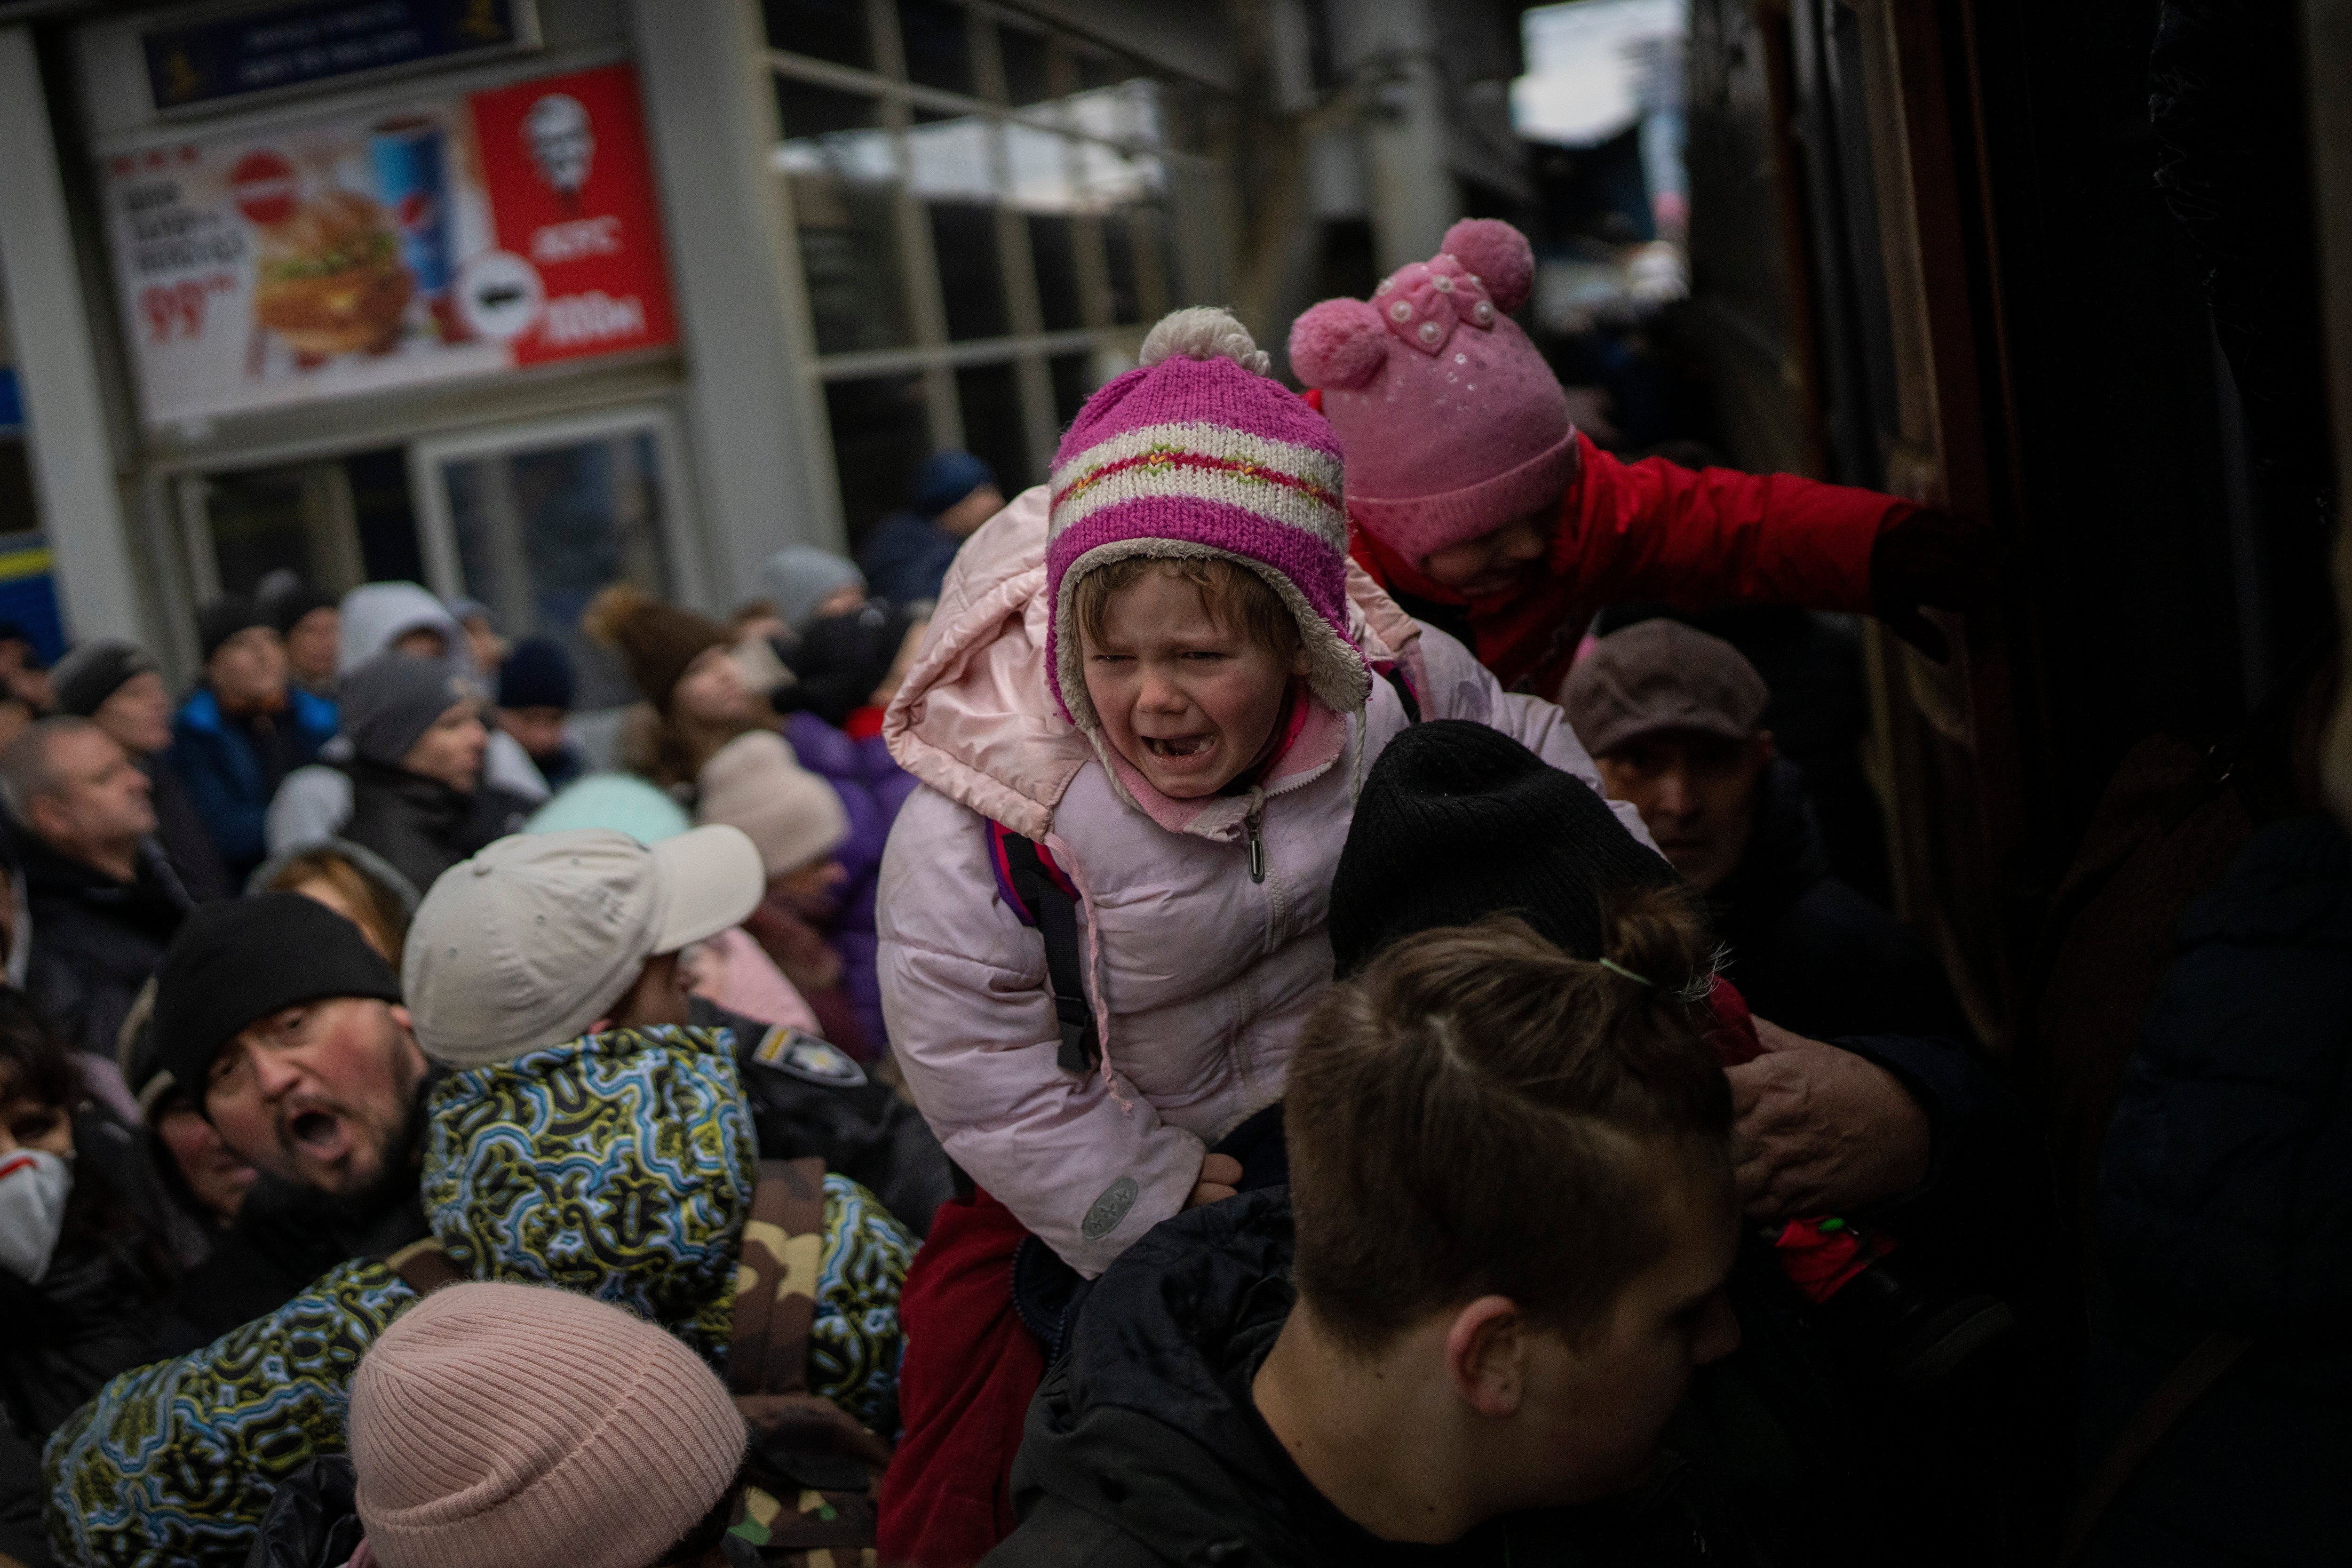 People holding their children struggle to get on a train to Lviv at the Kyiv station.